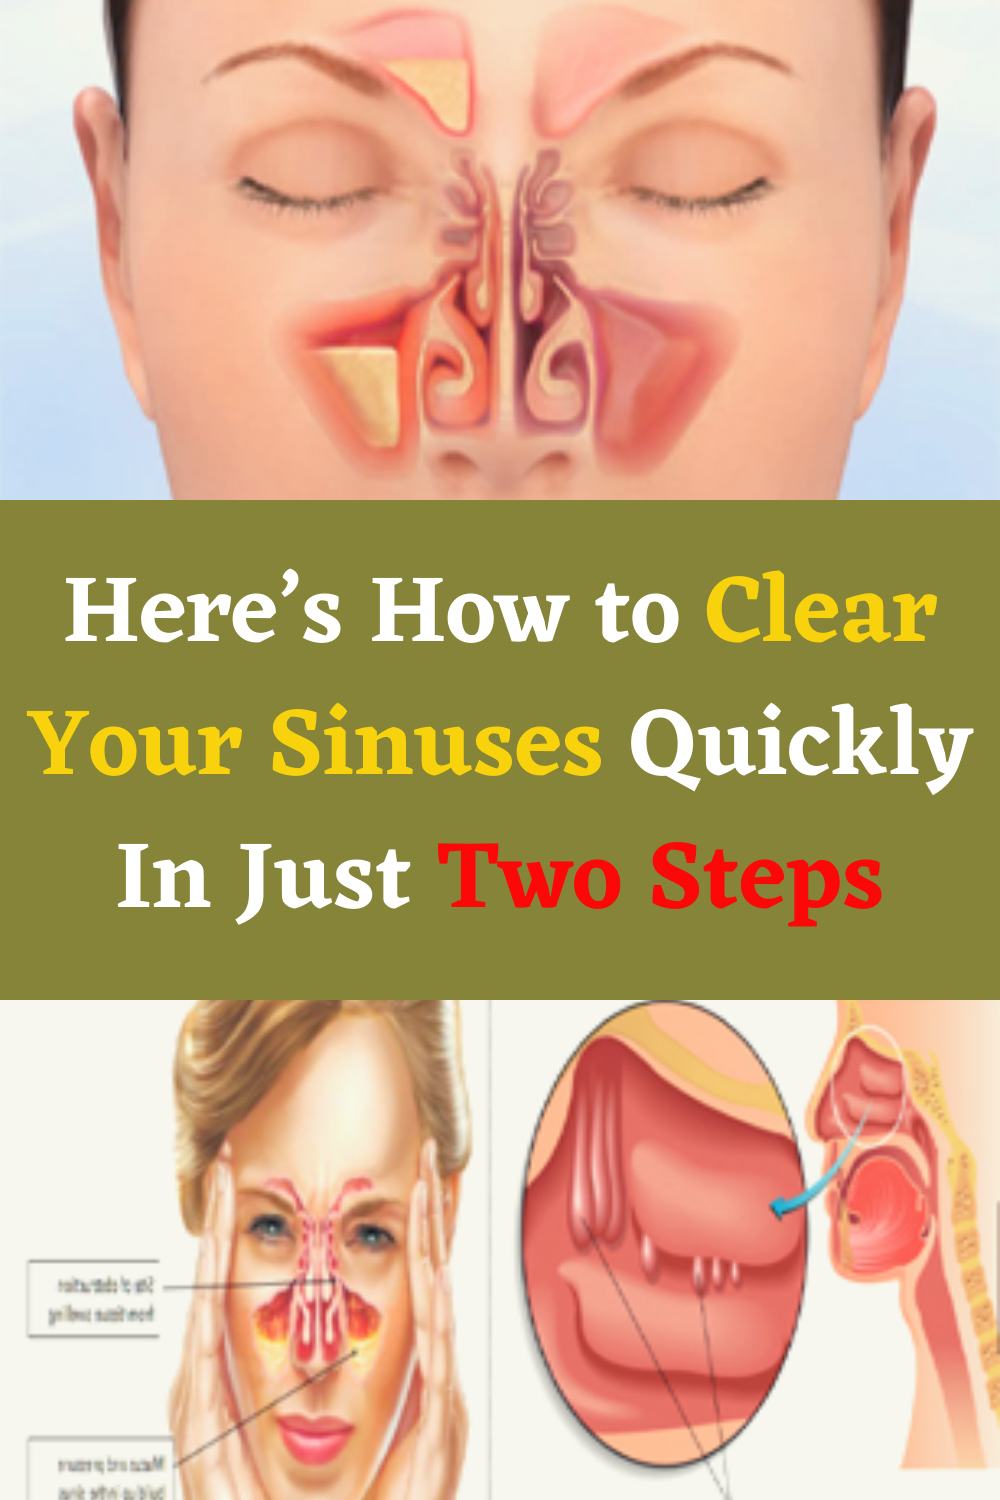 Hereâs How to Clear Your Sinuses Quickly In Just Two Steps